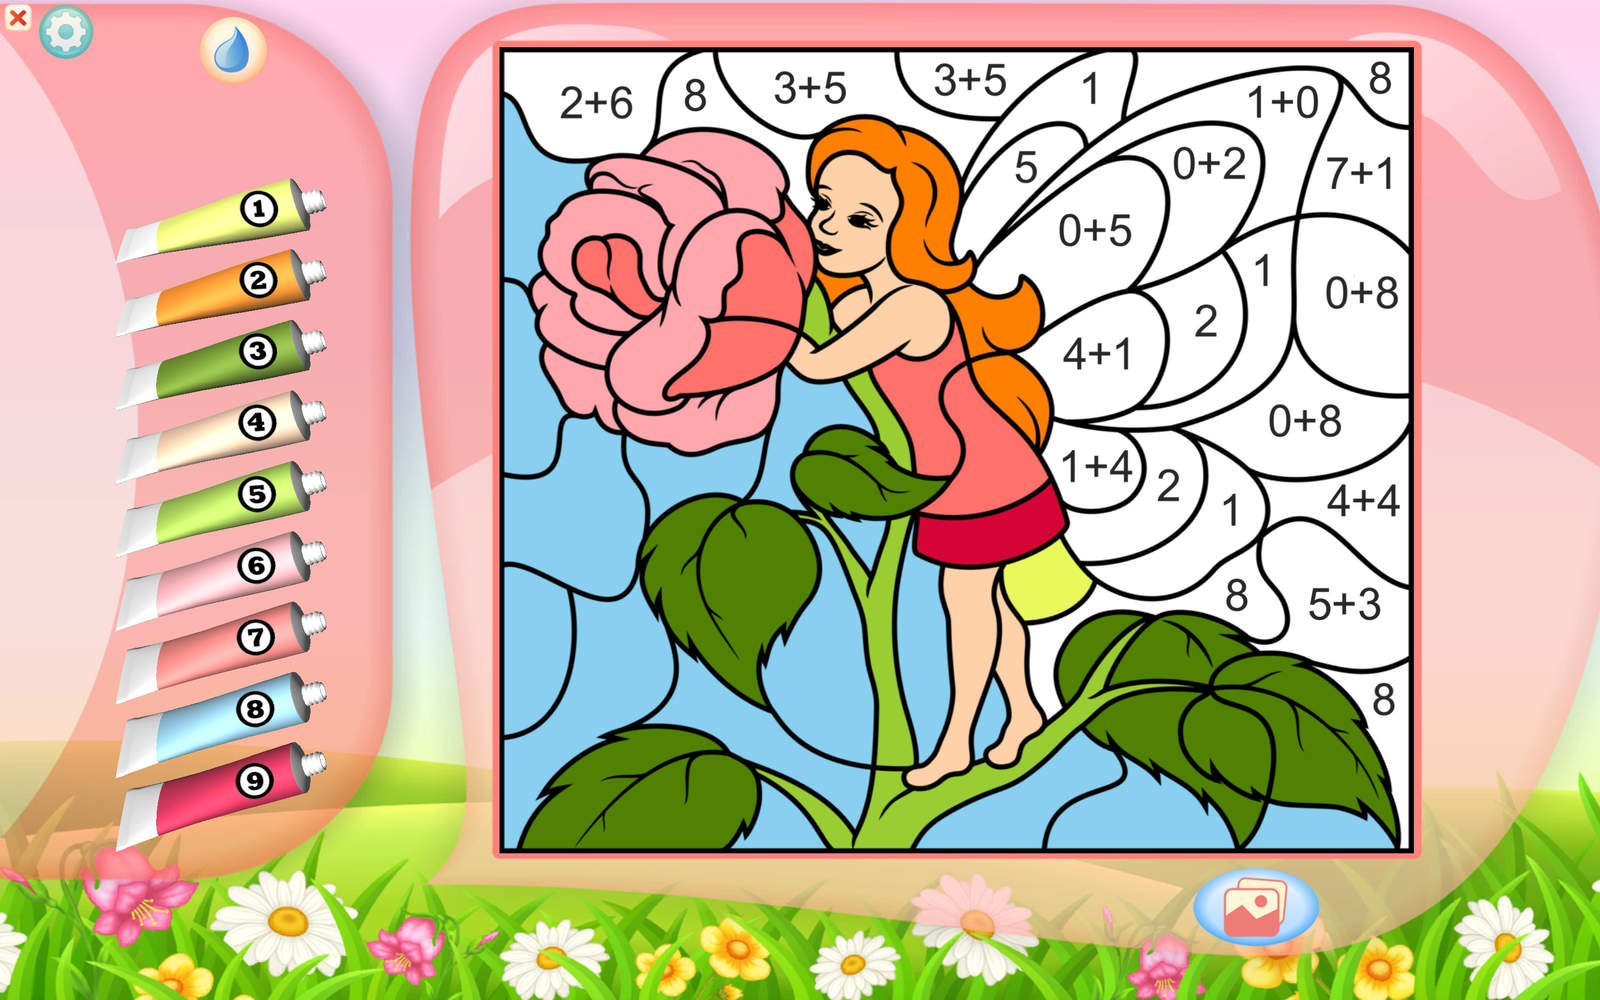 Fairy - Paint by Numbers - Coloring for Girls - Free 1.1 : Main Window